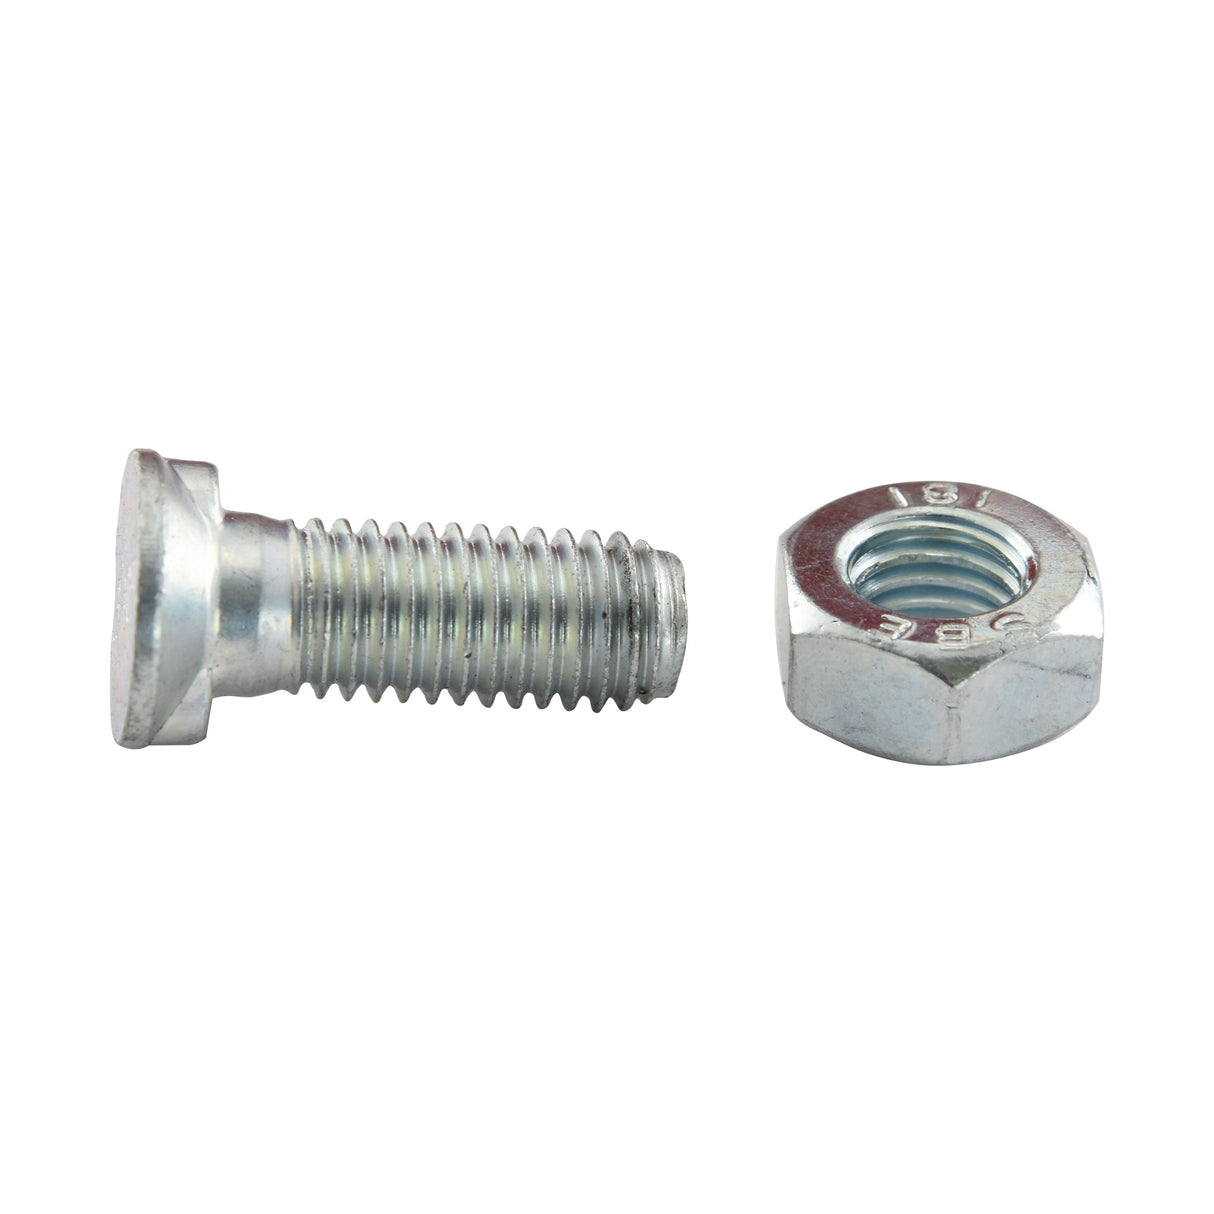 Countersunk Head Bolt 2 Nibs With Nut (TF2E) - M10 x 30mm, Tensile strength 10.9 (25 pcs. Box)
 - S.78756 - Farming Parts